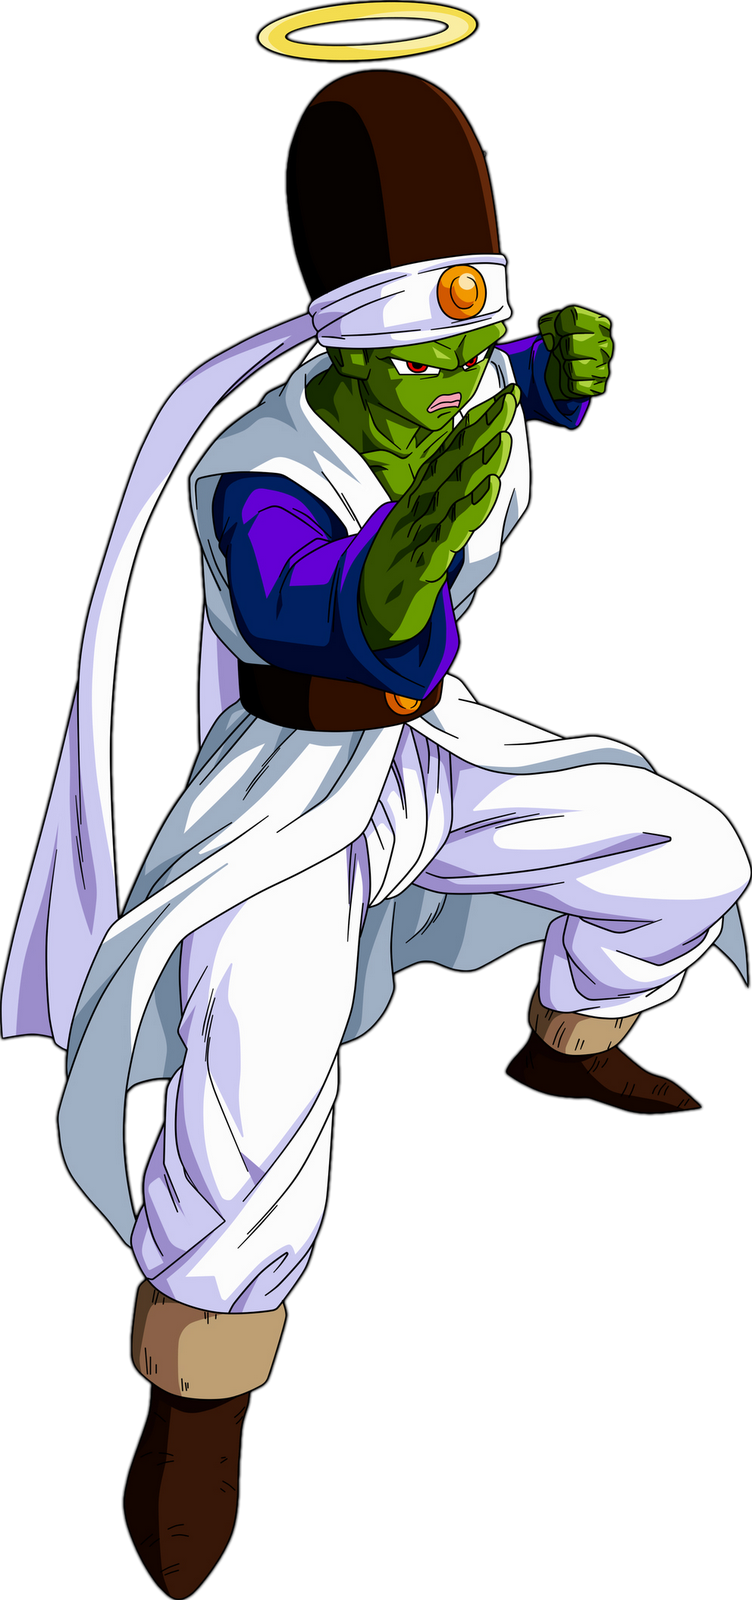 Image - Render Dragon Ball z pikkon.png | Heroes Wiki | FANDOM powered by Wikia